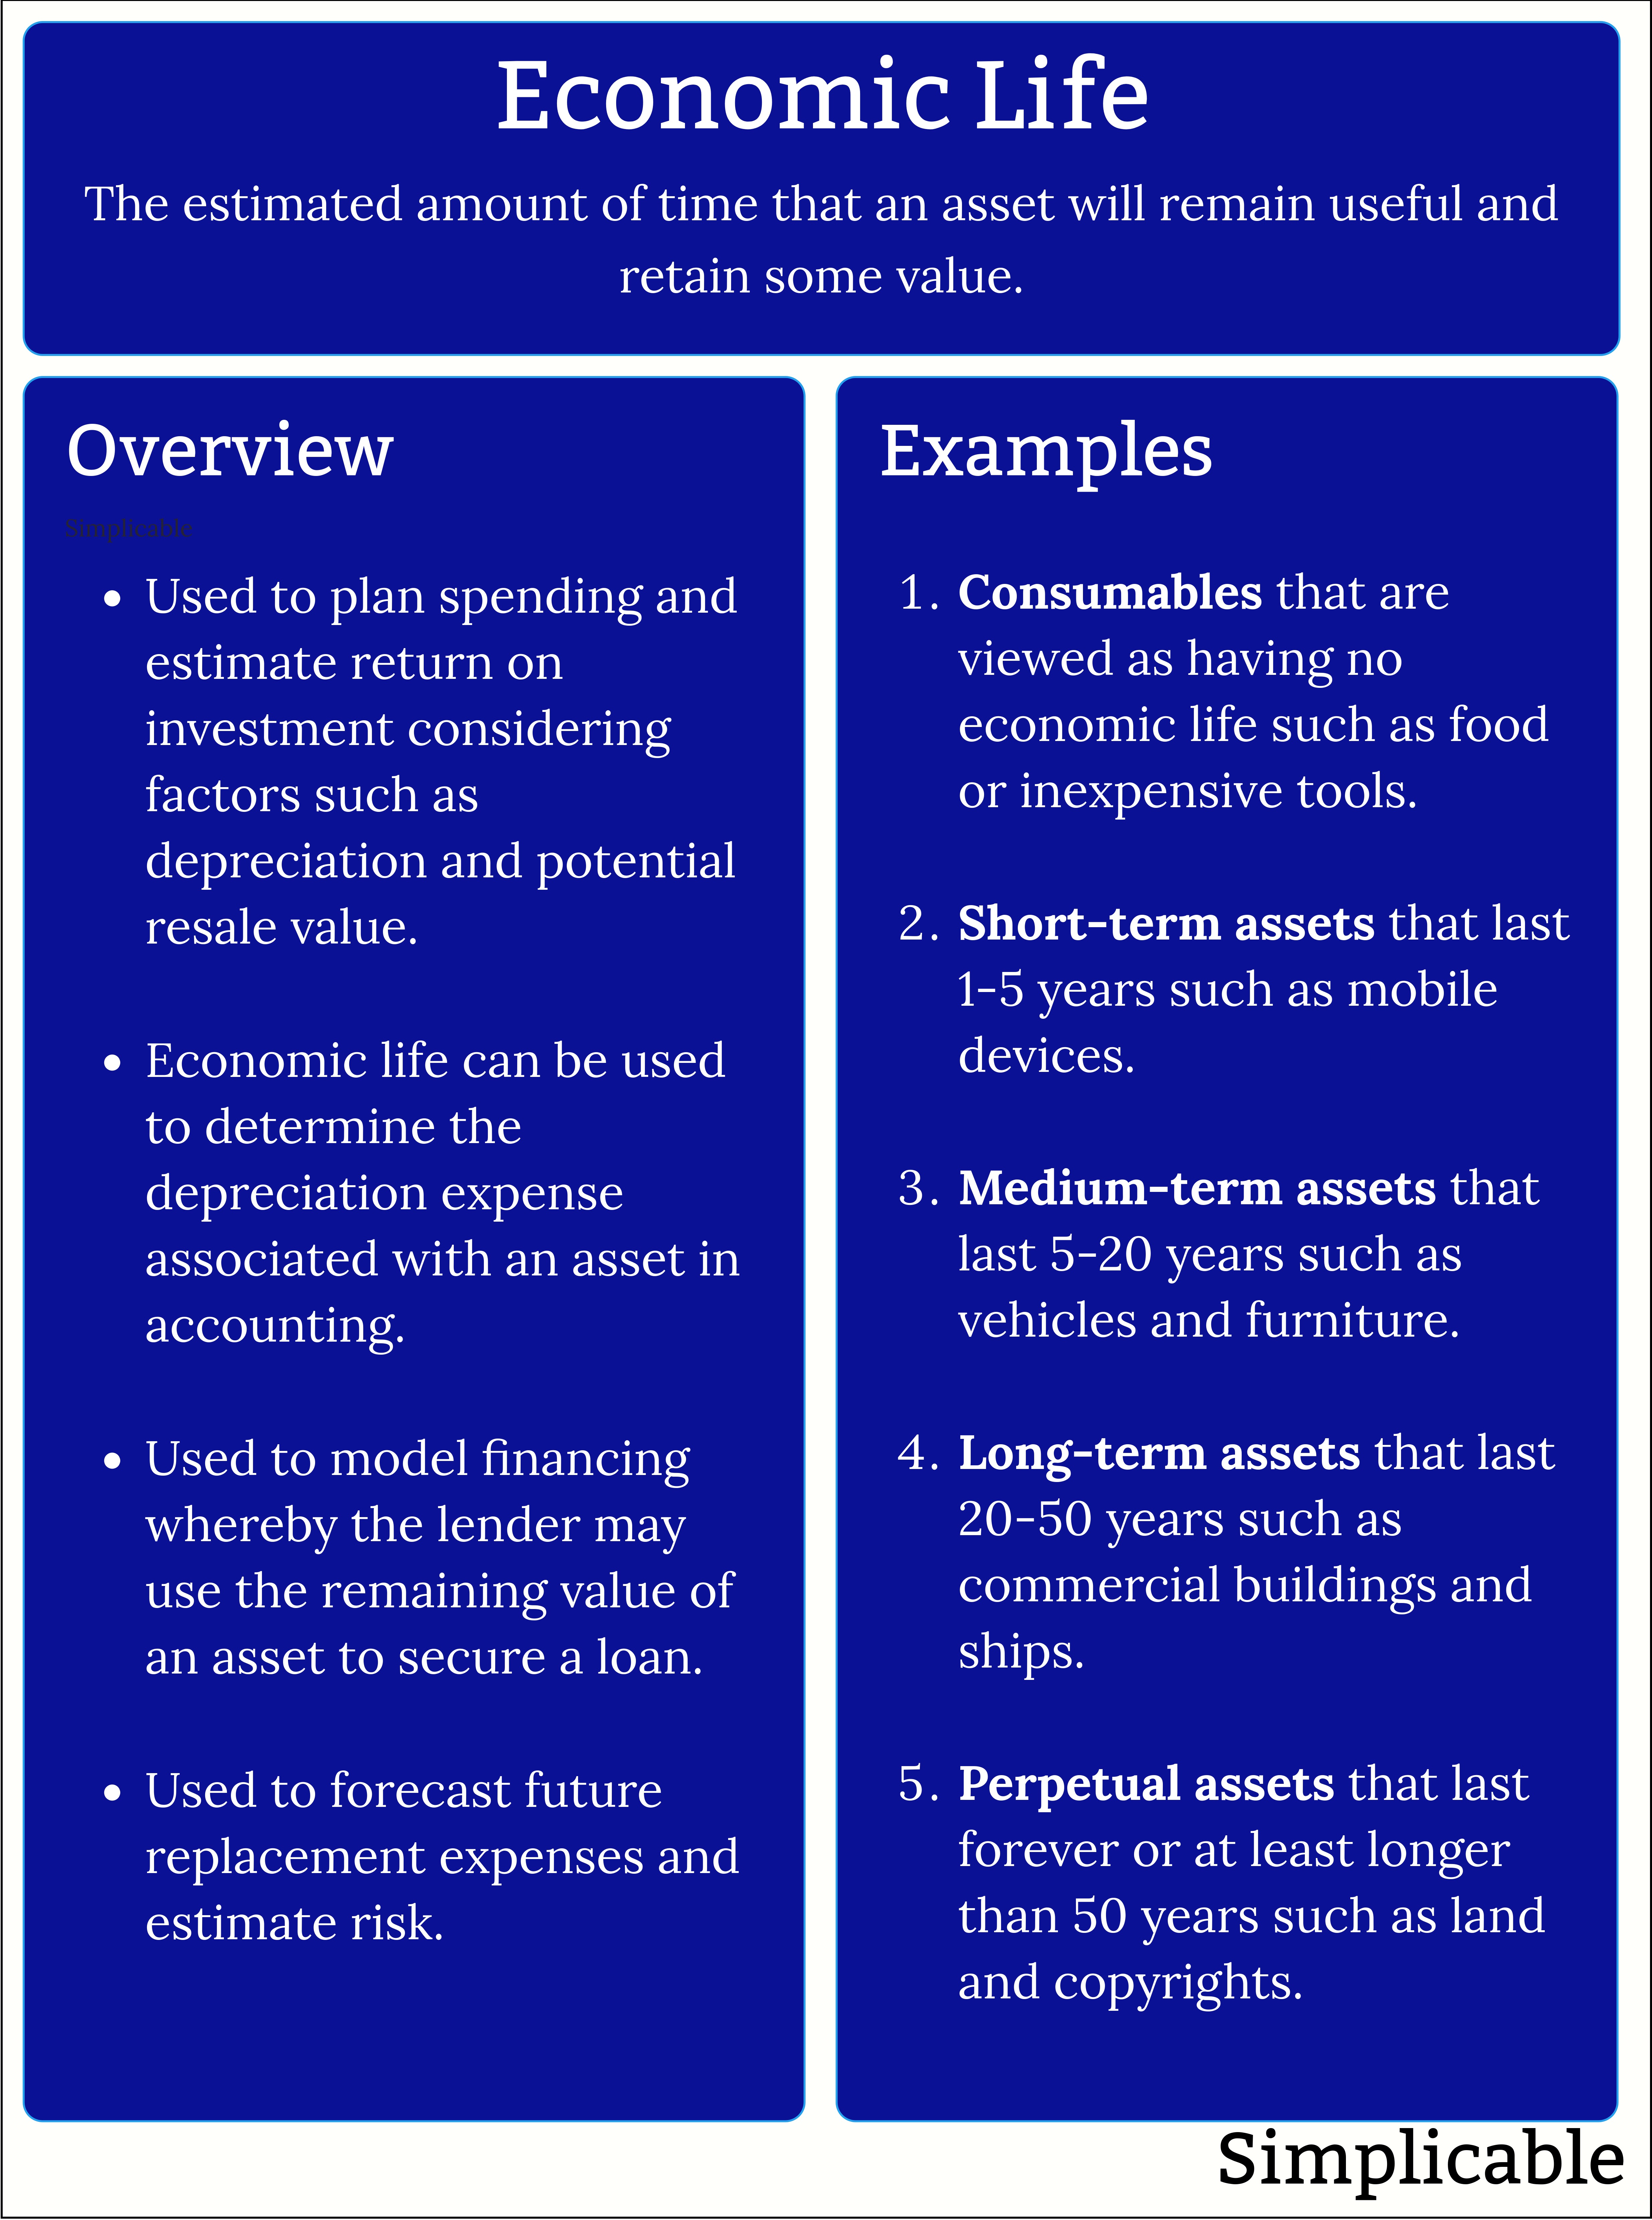 economic life overview and examples